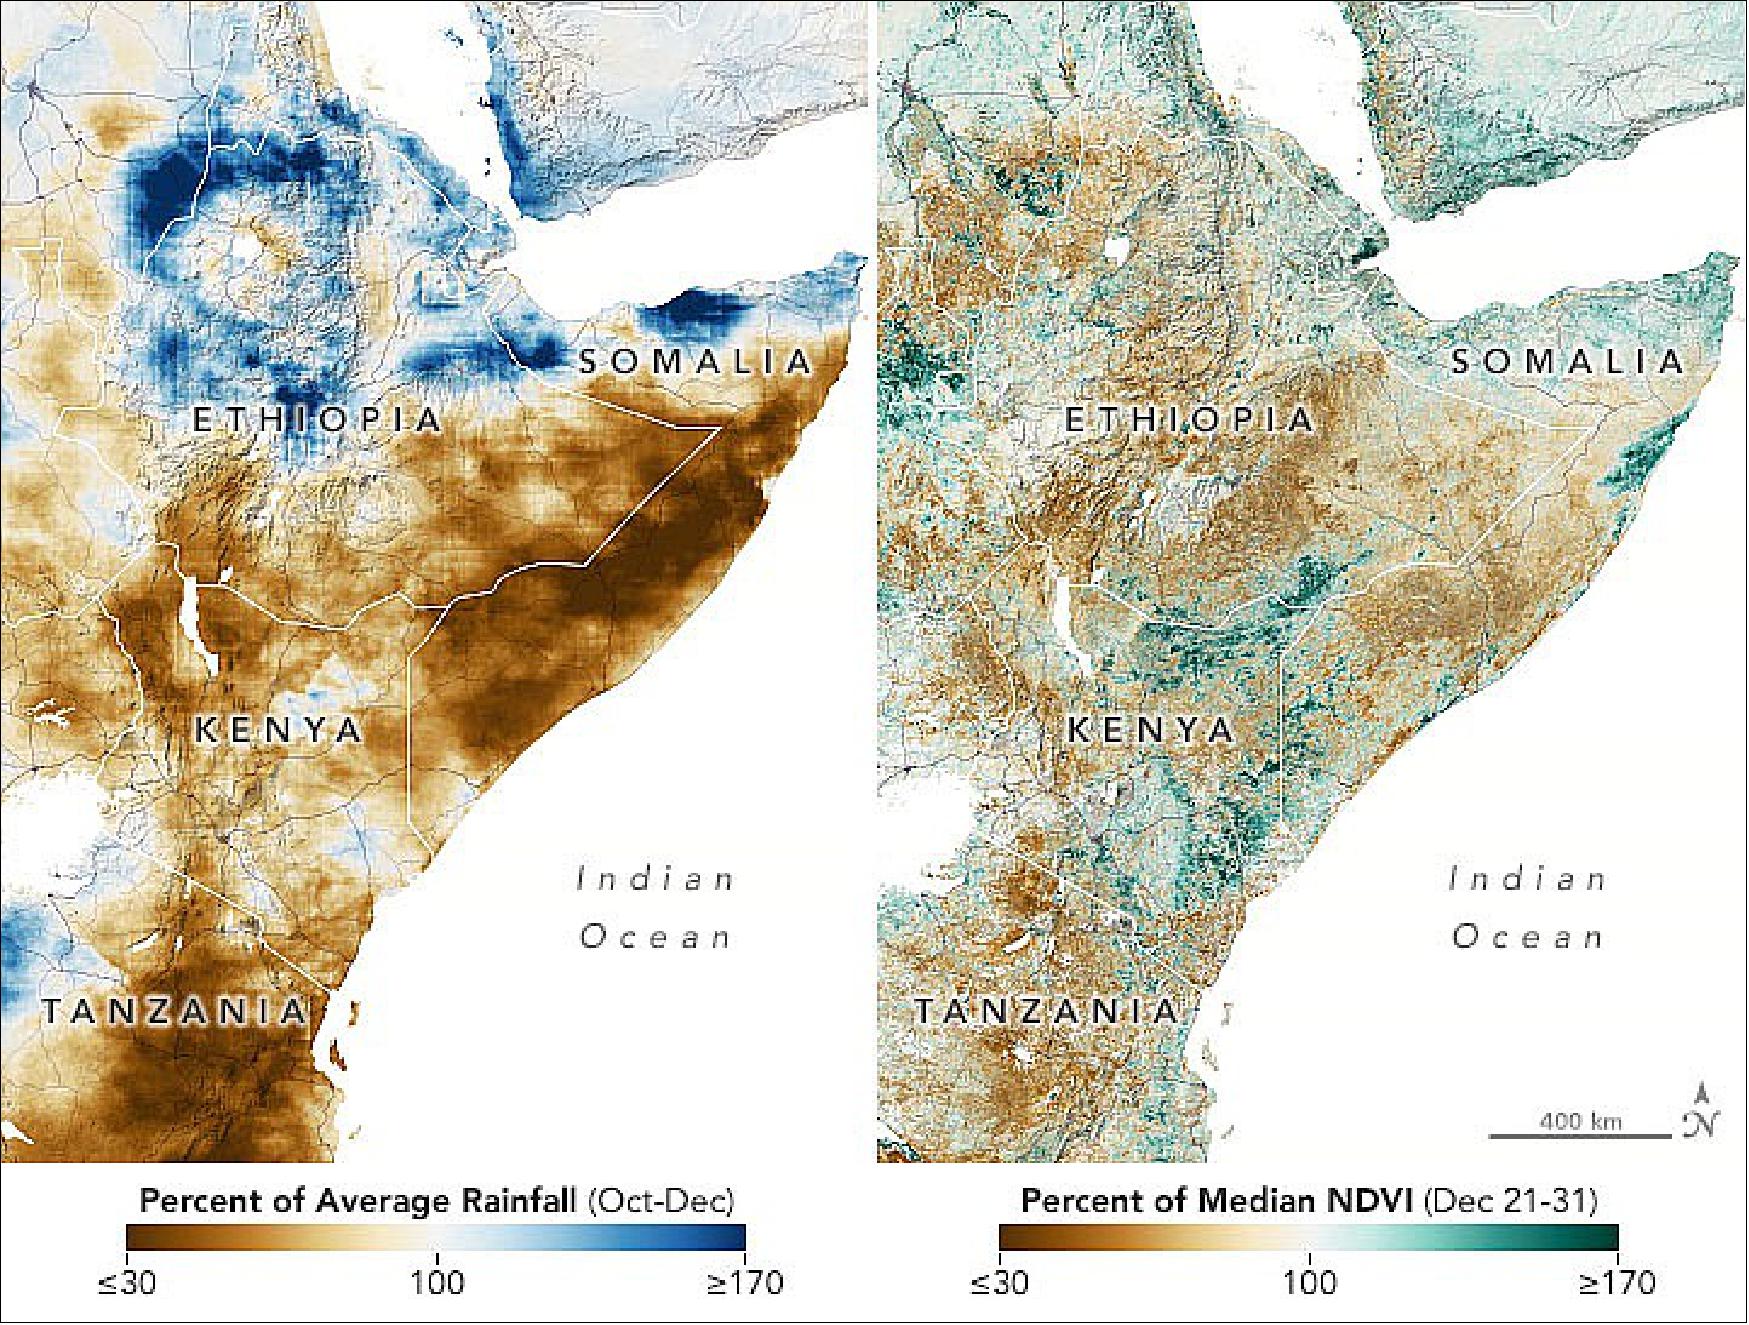 Figure 36: The map at the right shows anomalies in the Normalized Difference Vegetation Index (NDVI), a satellite-derived product used to assess crop conditions. NDVI measures the health, or “greenness,” of vegetation based on how much red and near-infrared light the leaves reflect. Healthy vegetation reflects more infrared light and less visible light than stressed vegetation. The map compares NDVI from December 2021 with the long-term average from 2000 to 2013. The data come from the Moderate Resolution Imaging Spectroradiometer (MODIS) on NASA’s Terra satellite and the analysis comes from the USGS FEWS NET Data Portal [image credit: NASA Earth Observatory images by Joshua Stevens, using data from the Climate Hazards Center, the Famine Early Warning System Network (FEWS Net), and modified Copernicus Sentinel data (2021) processed by the European Space Agency courtesy of Josh Willis/NASA/JPL-Caltech. Story by Michael Carlowicz)]